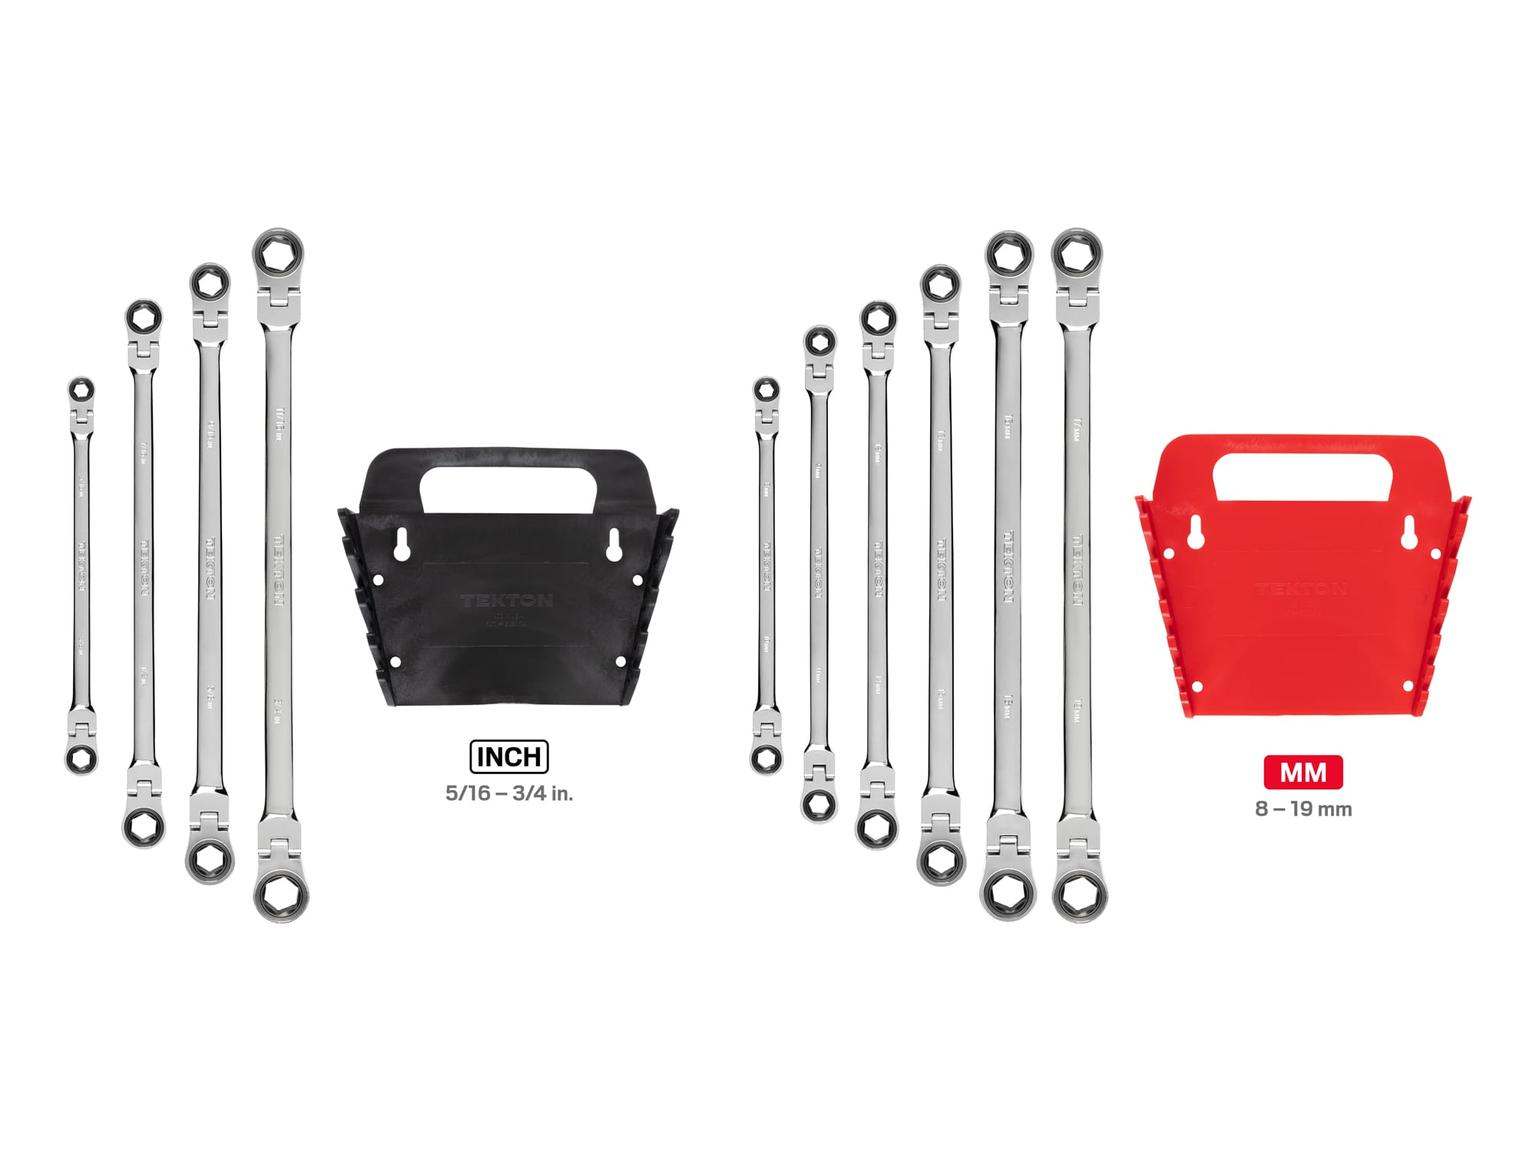 TEKTON WRN77321-T Long Flex Ratcheting Box End Wrench Set with Holder, 10-Piece (5/16-3/4 in., 8-19 mm)